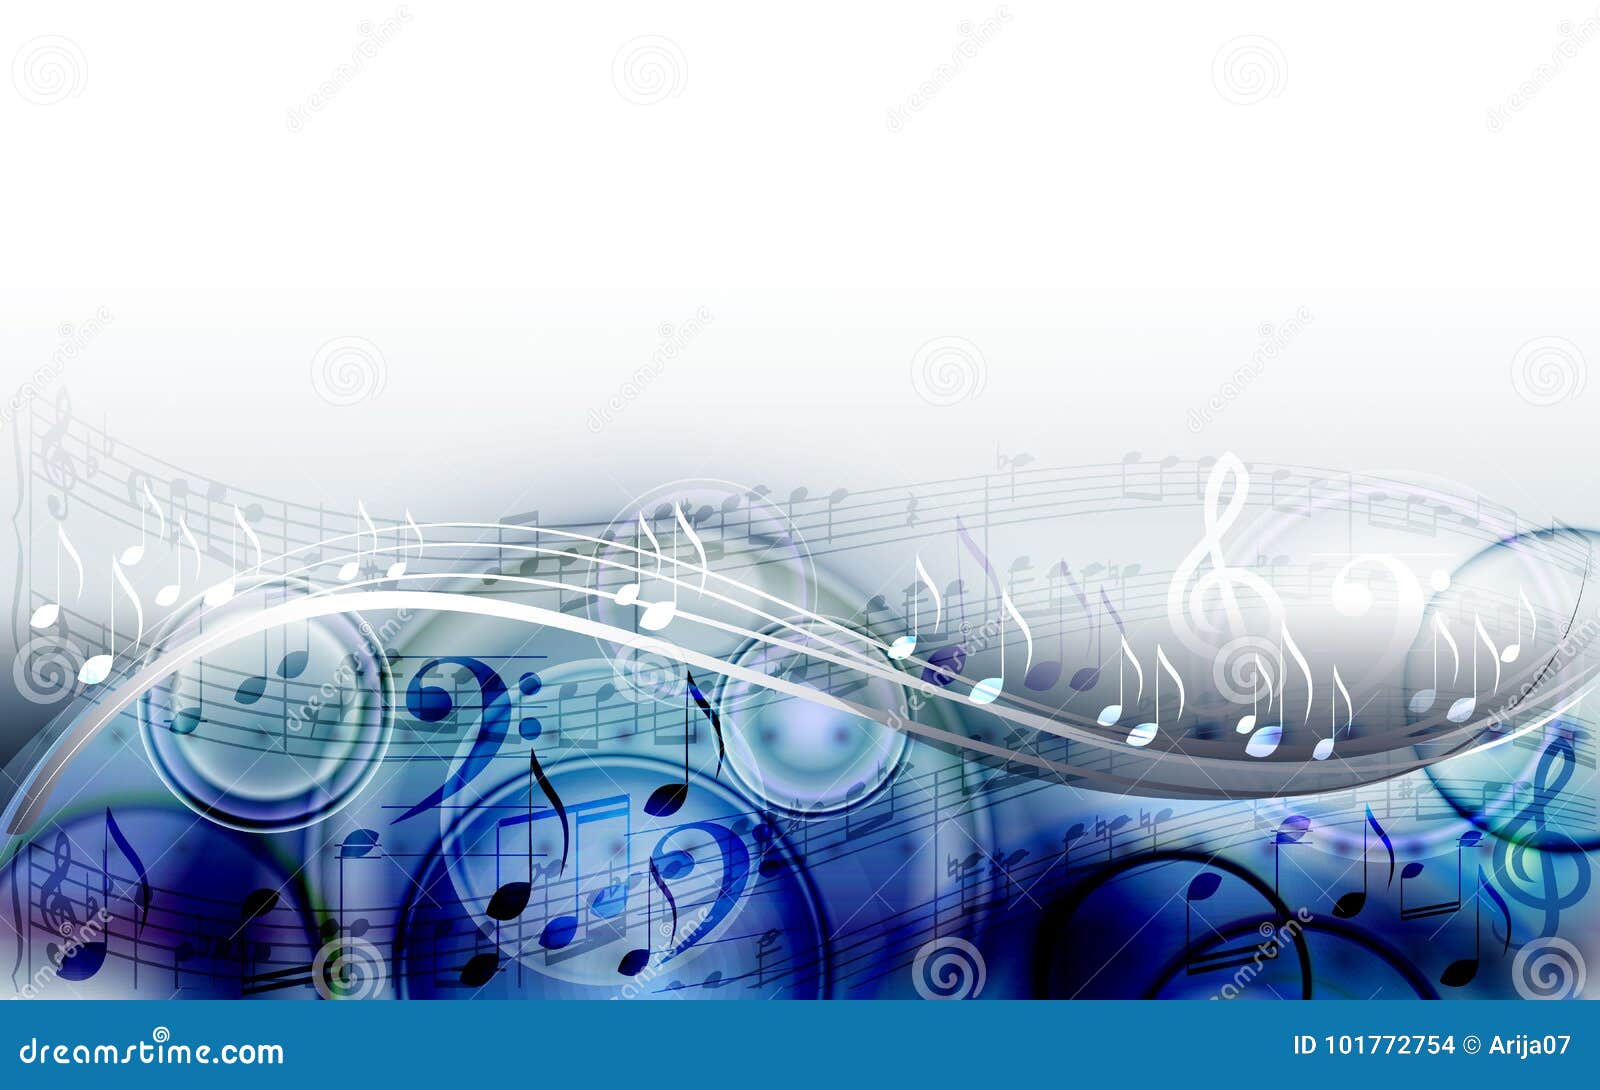 abstract sheet music  background with musical notes